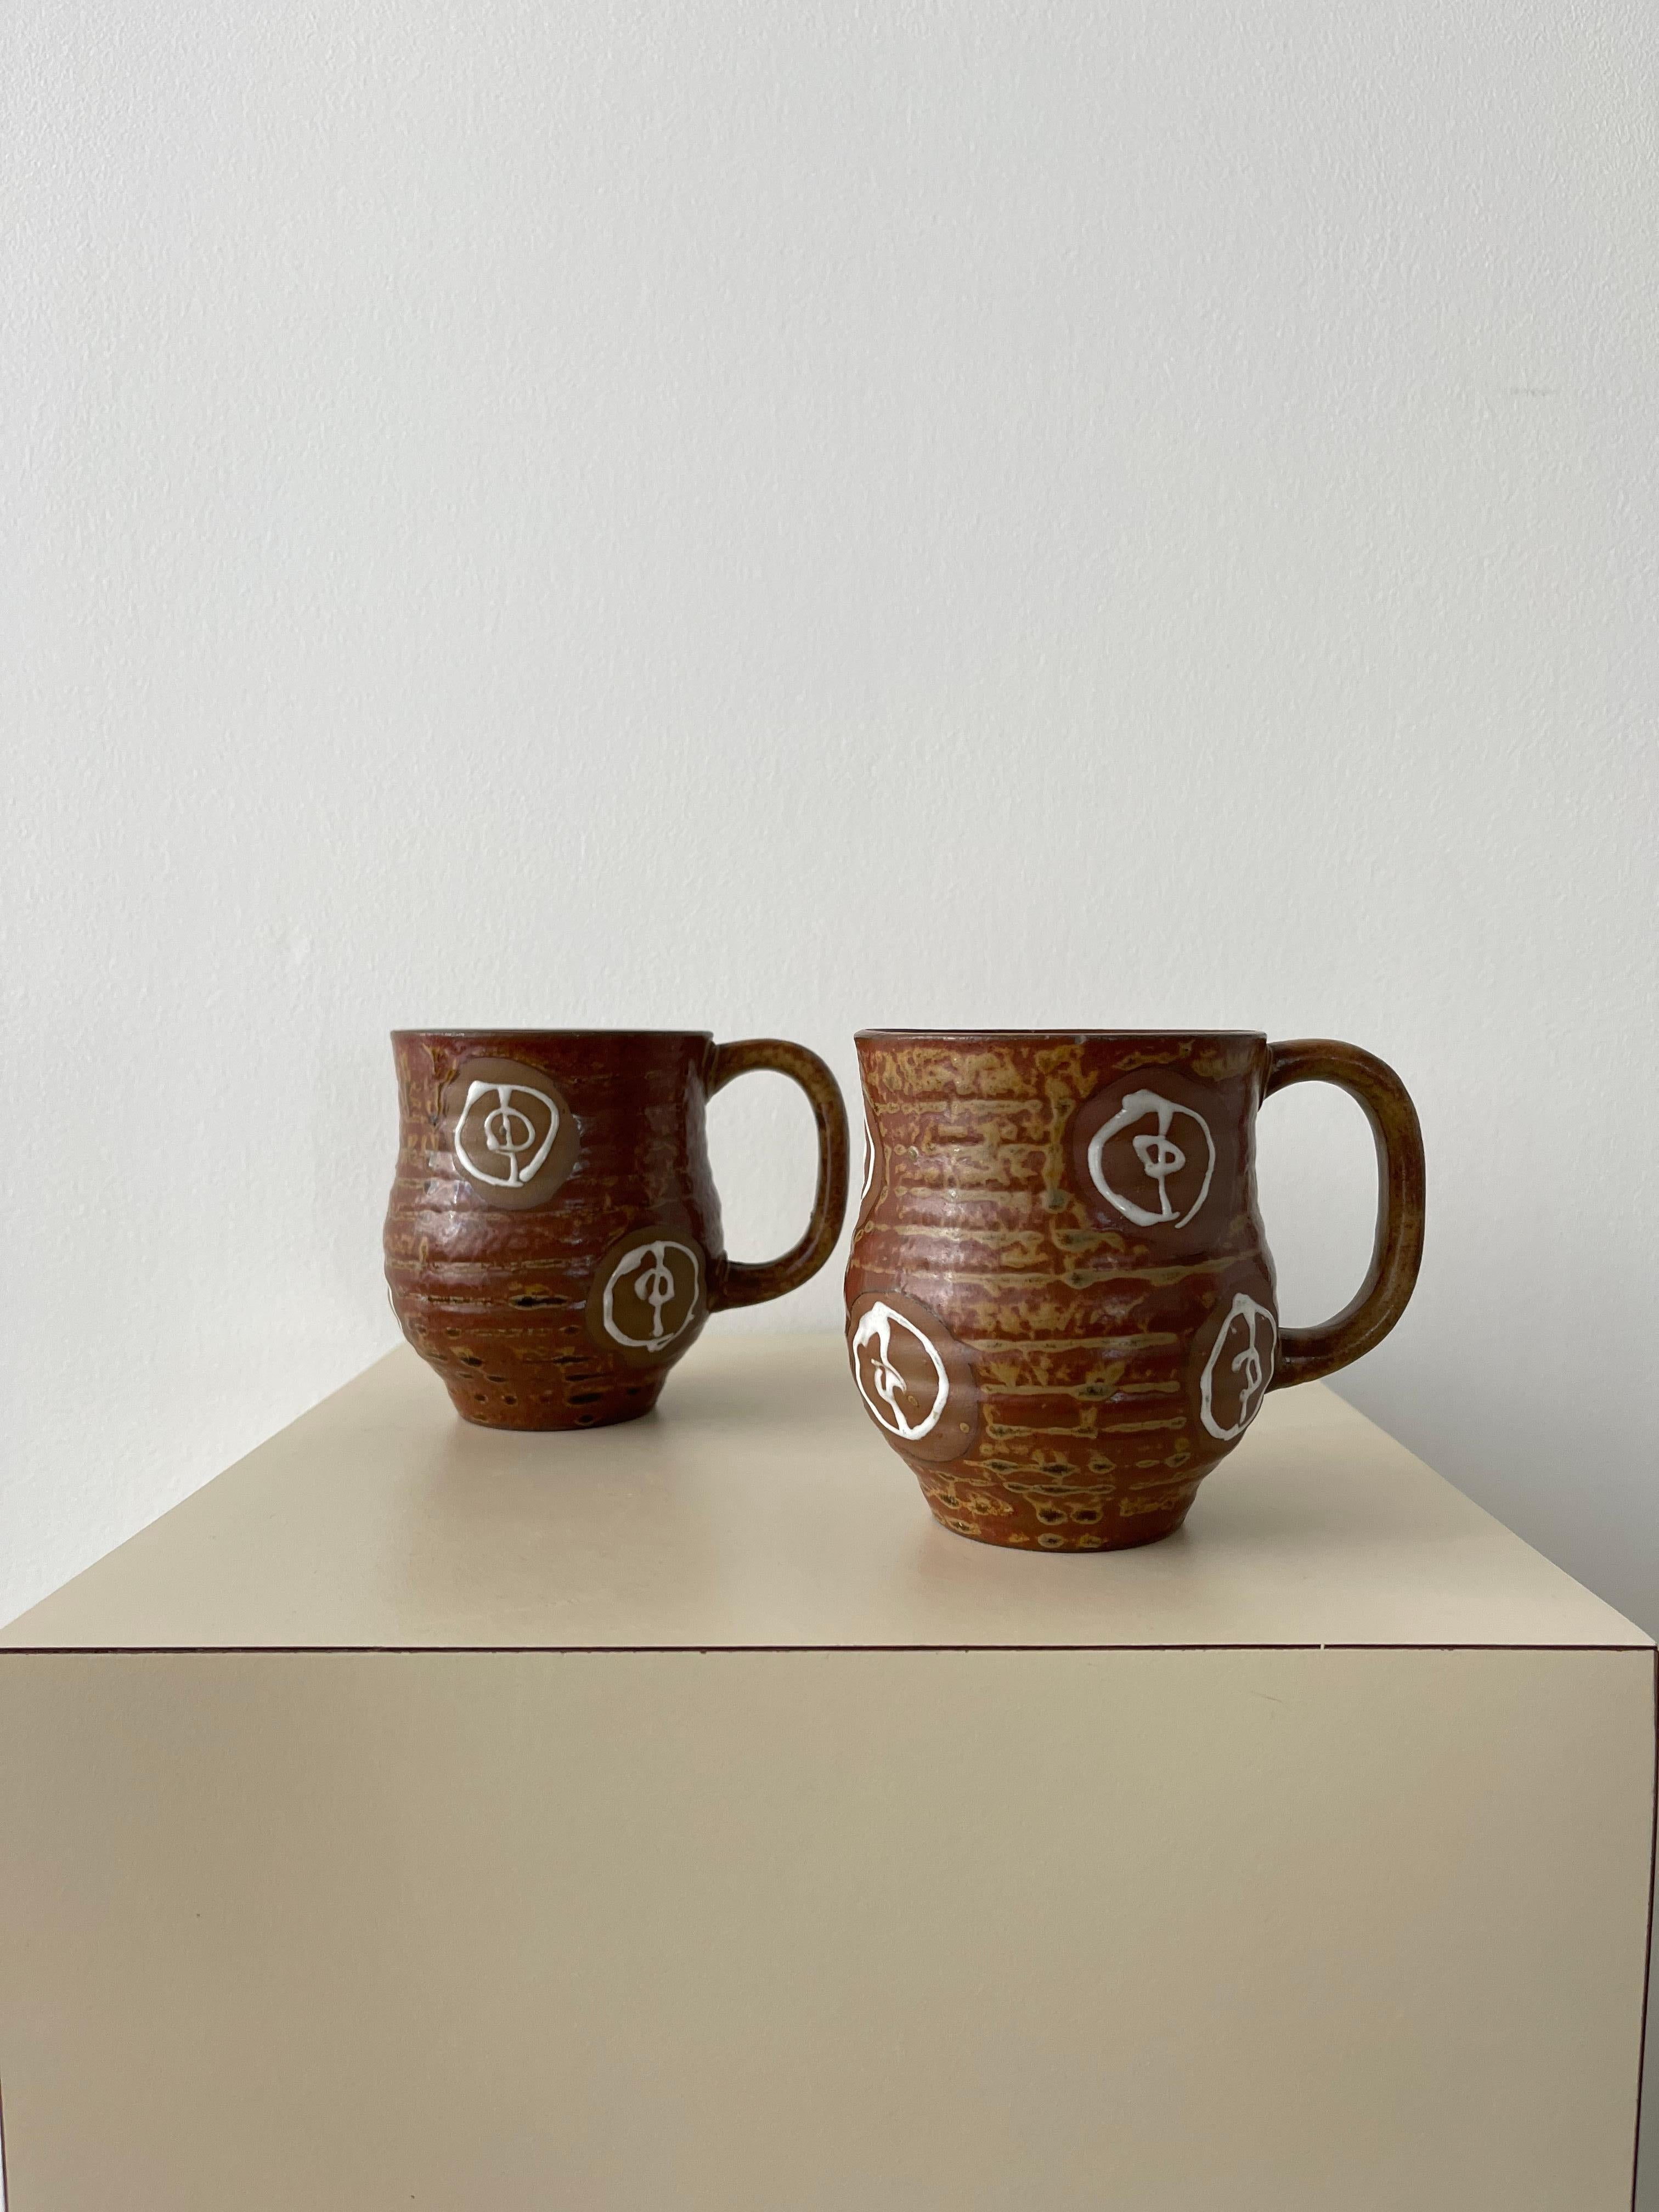 20th Century Ceramic mugs in a multi colored brown colorway with a unique glazed finish and design that resembles freeform bullseyes. Unique ridged texture with handles and a fluted opening.